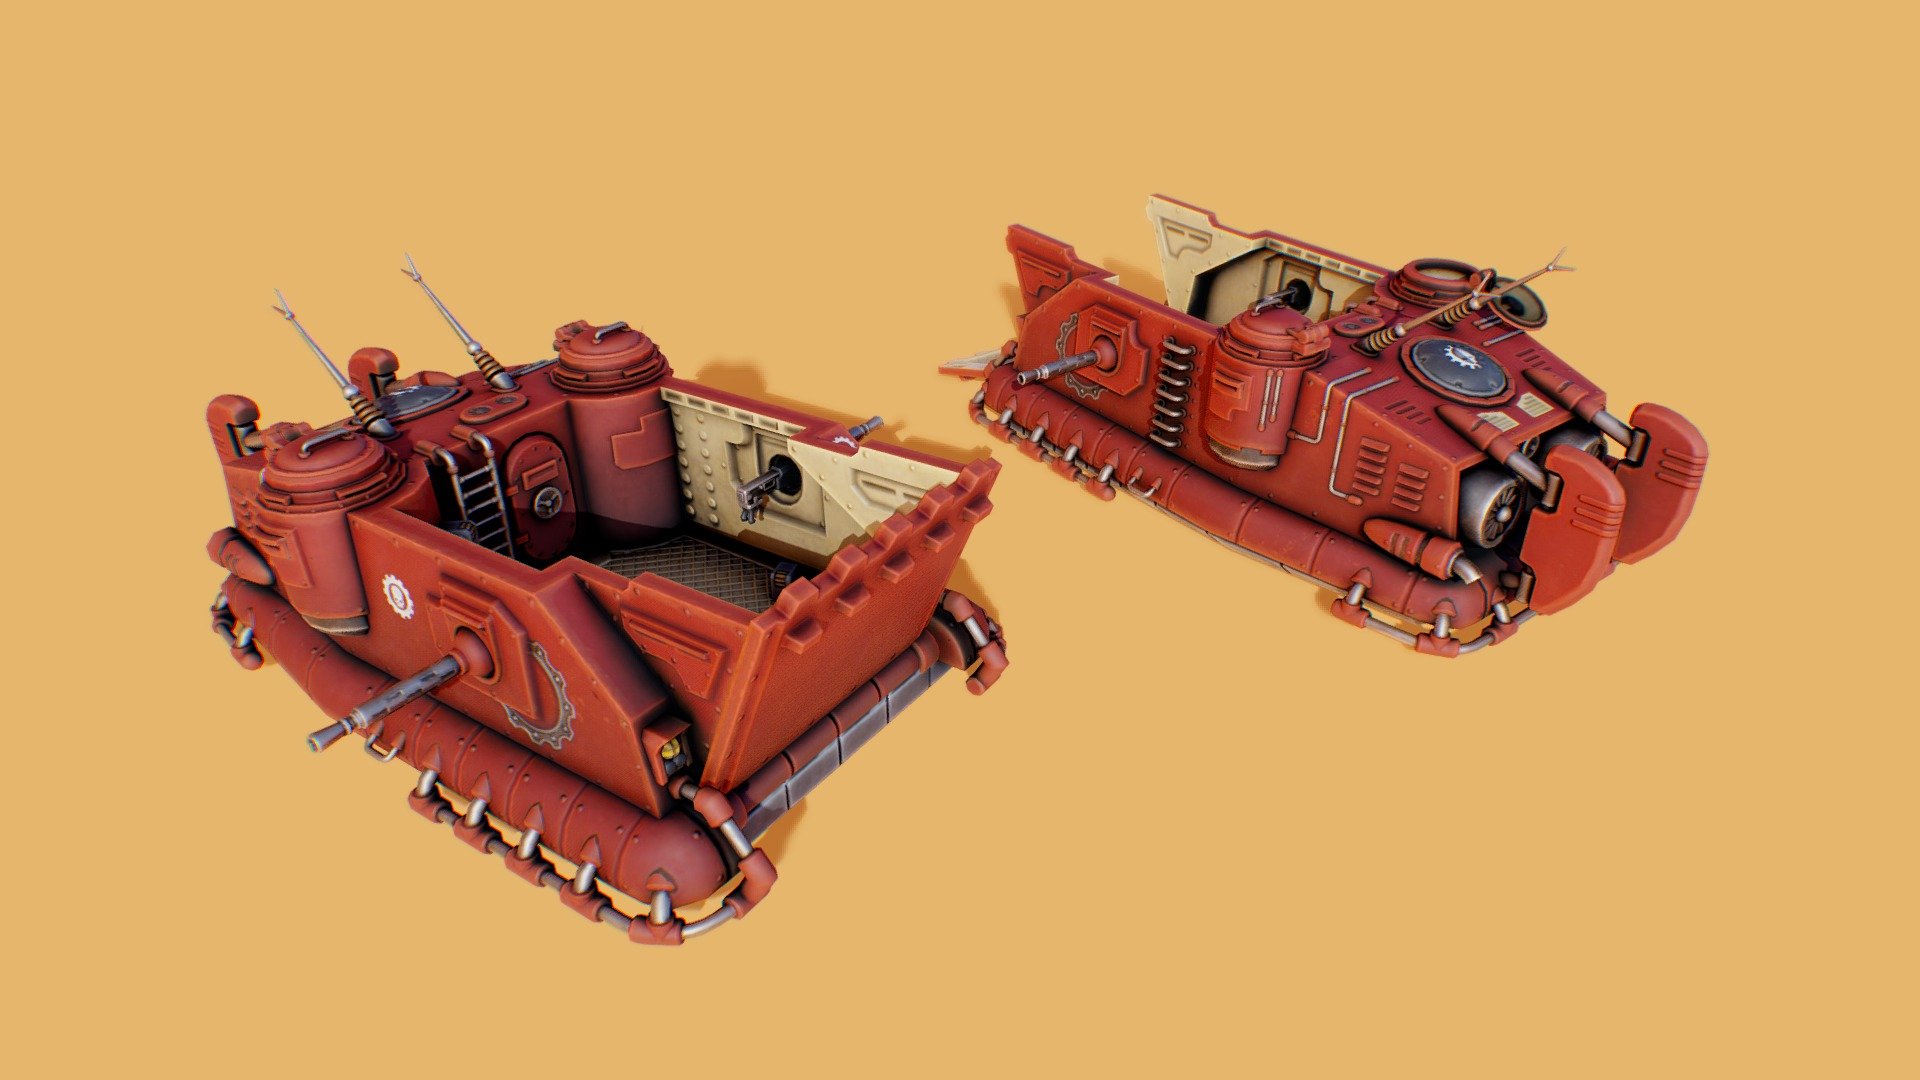 3d model I've been working on during my free time over a few months. The model is a vehicle from the adeptus mecanicus faction from W40k, I've been collecting these figurines for a while so I decided to try and make one myself. this time I decided to bake normal in substance painter to make the model more game ready. Managed to make a 3d print out of the high poly version too, I'll probably post about it on artstation when I finish painting it! a .blend file with the high poly meshes splitted for a 12x6cm printer and more are available in the .zip file if you want to purchase this model 3d model